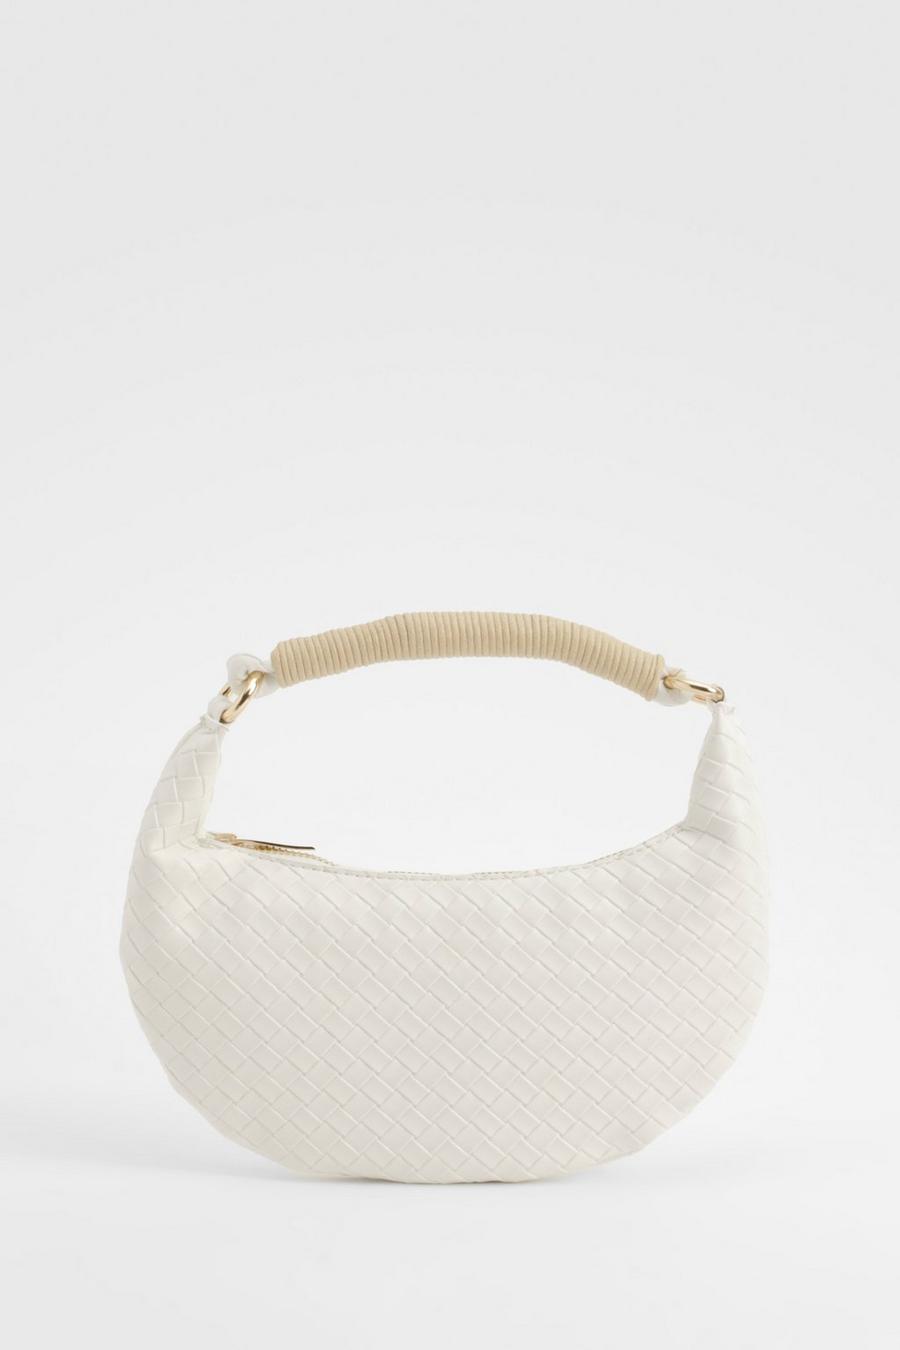 White Woven Structured Handle Grab Bag